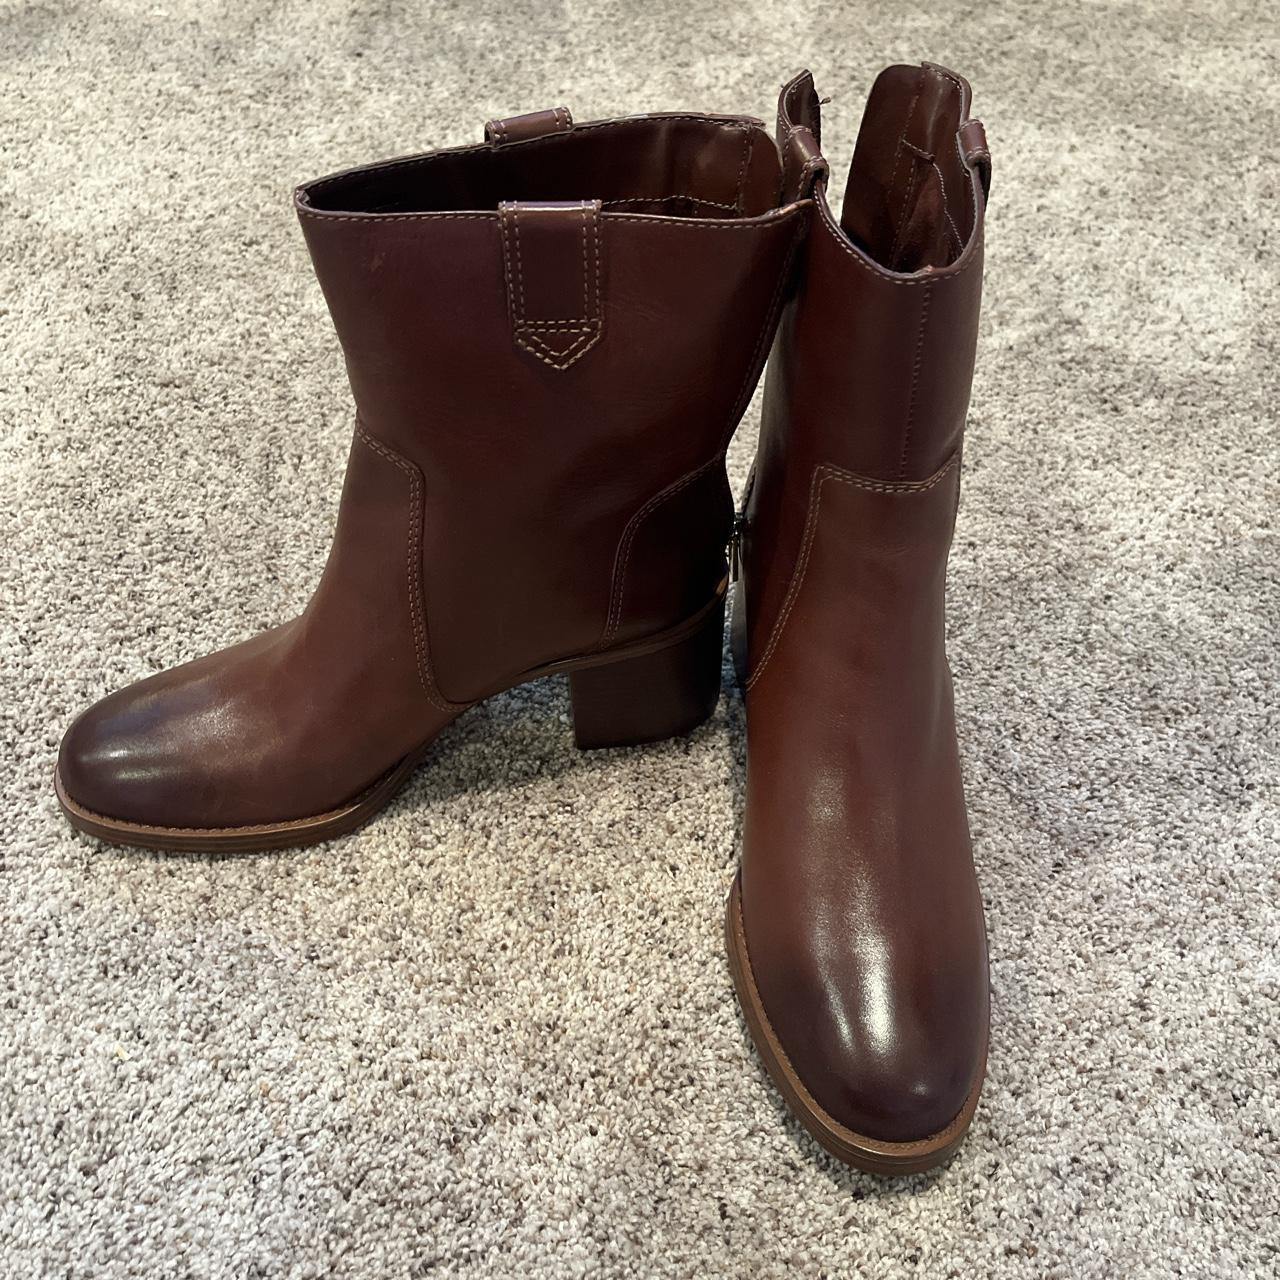 Vince Camuto Women's Burgundy Boots